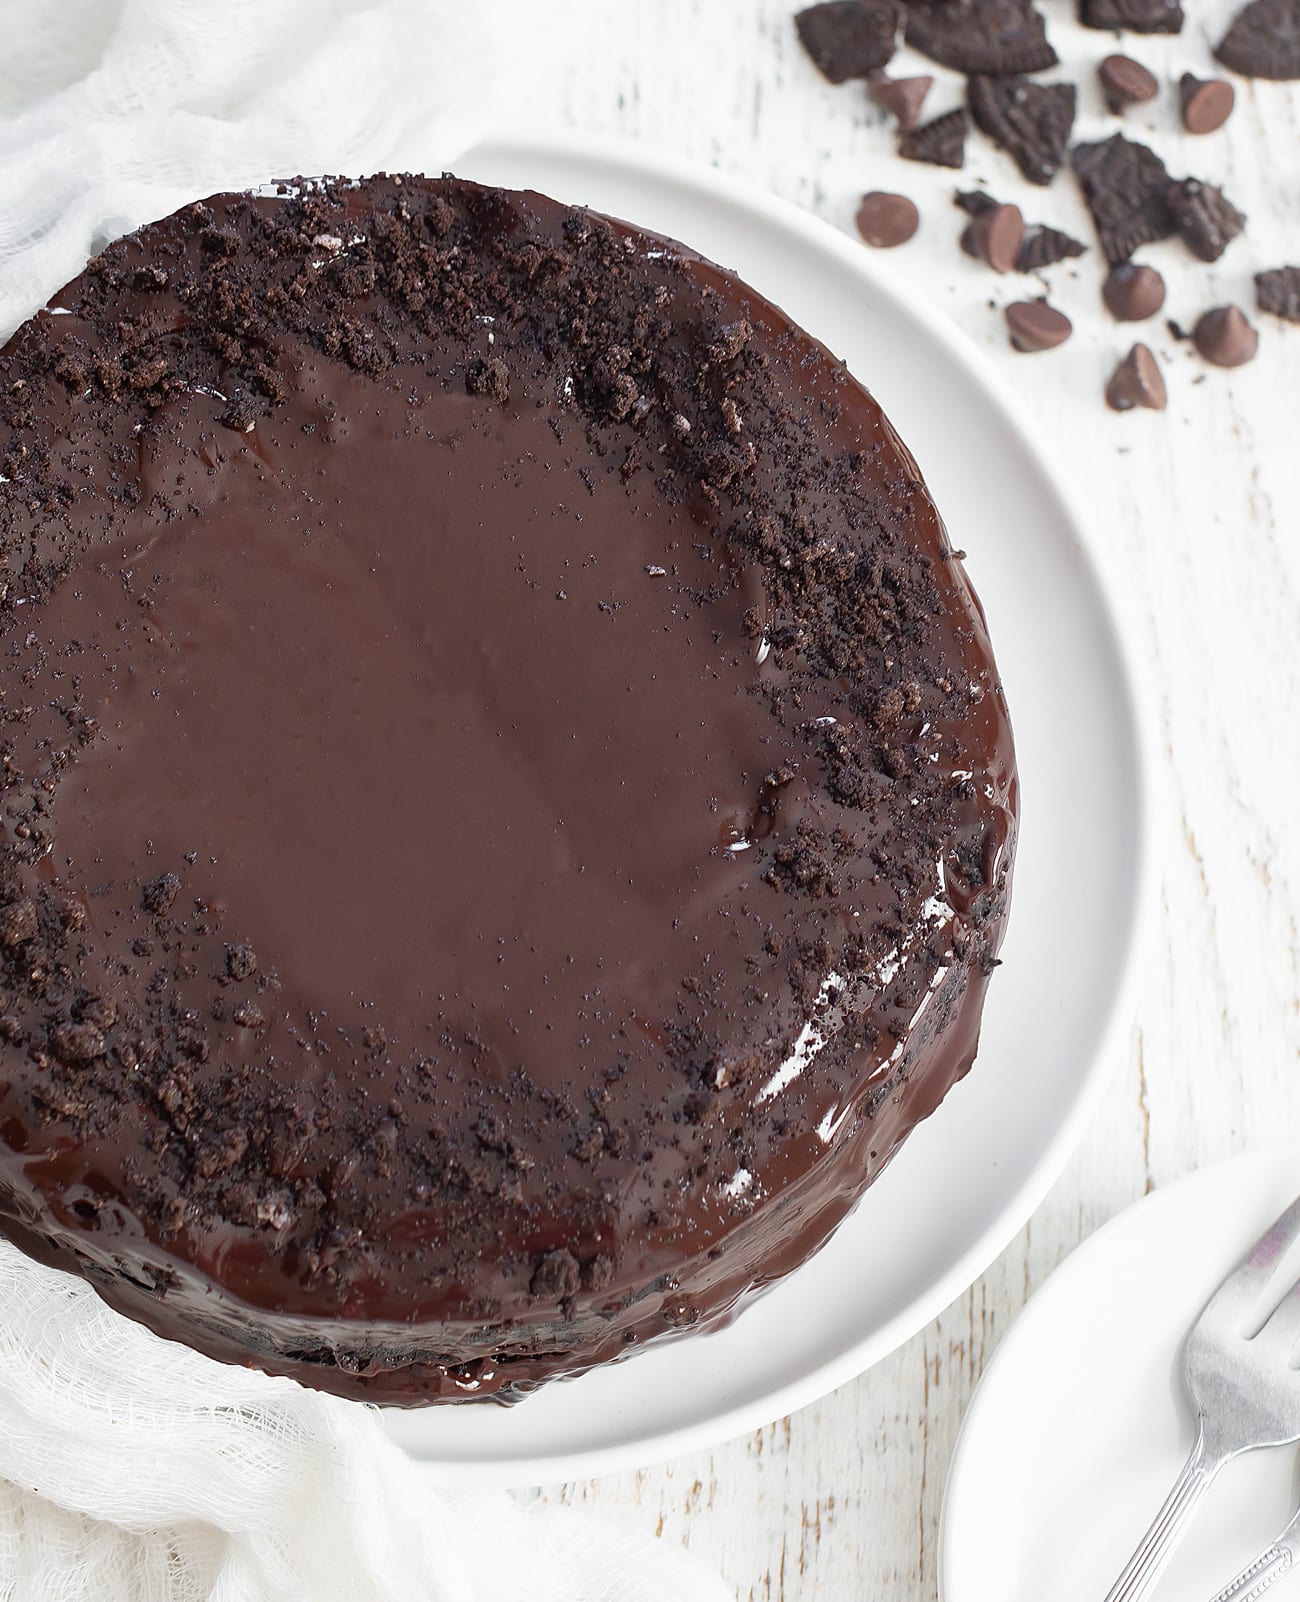 Lazy No Bake Chocolate Cake - Keto 5 Ingredient - This Mom is on Fire